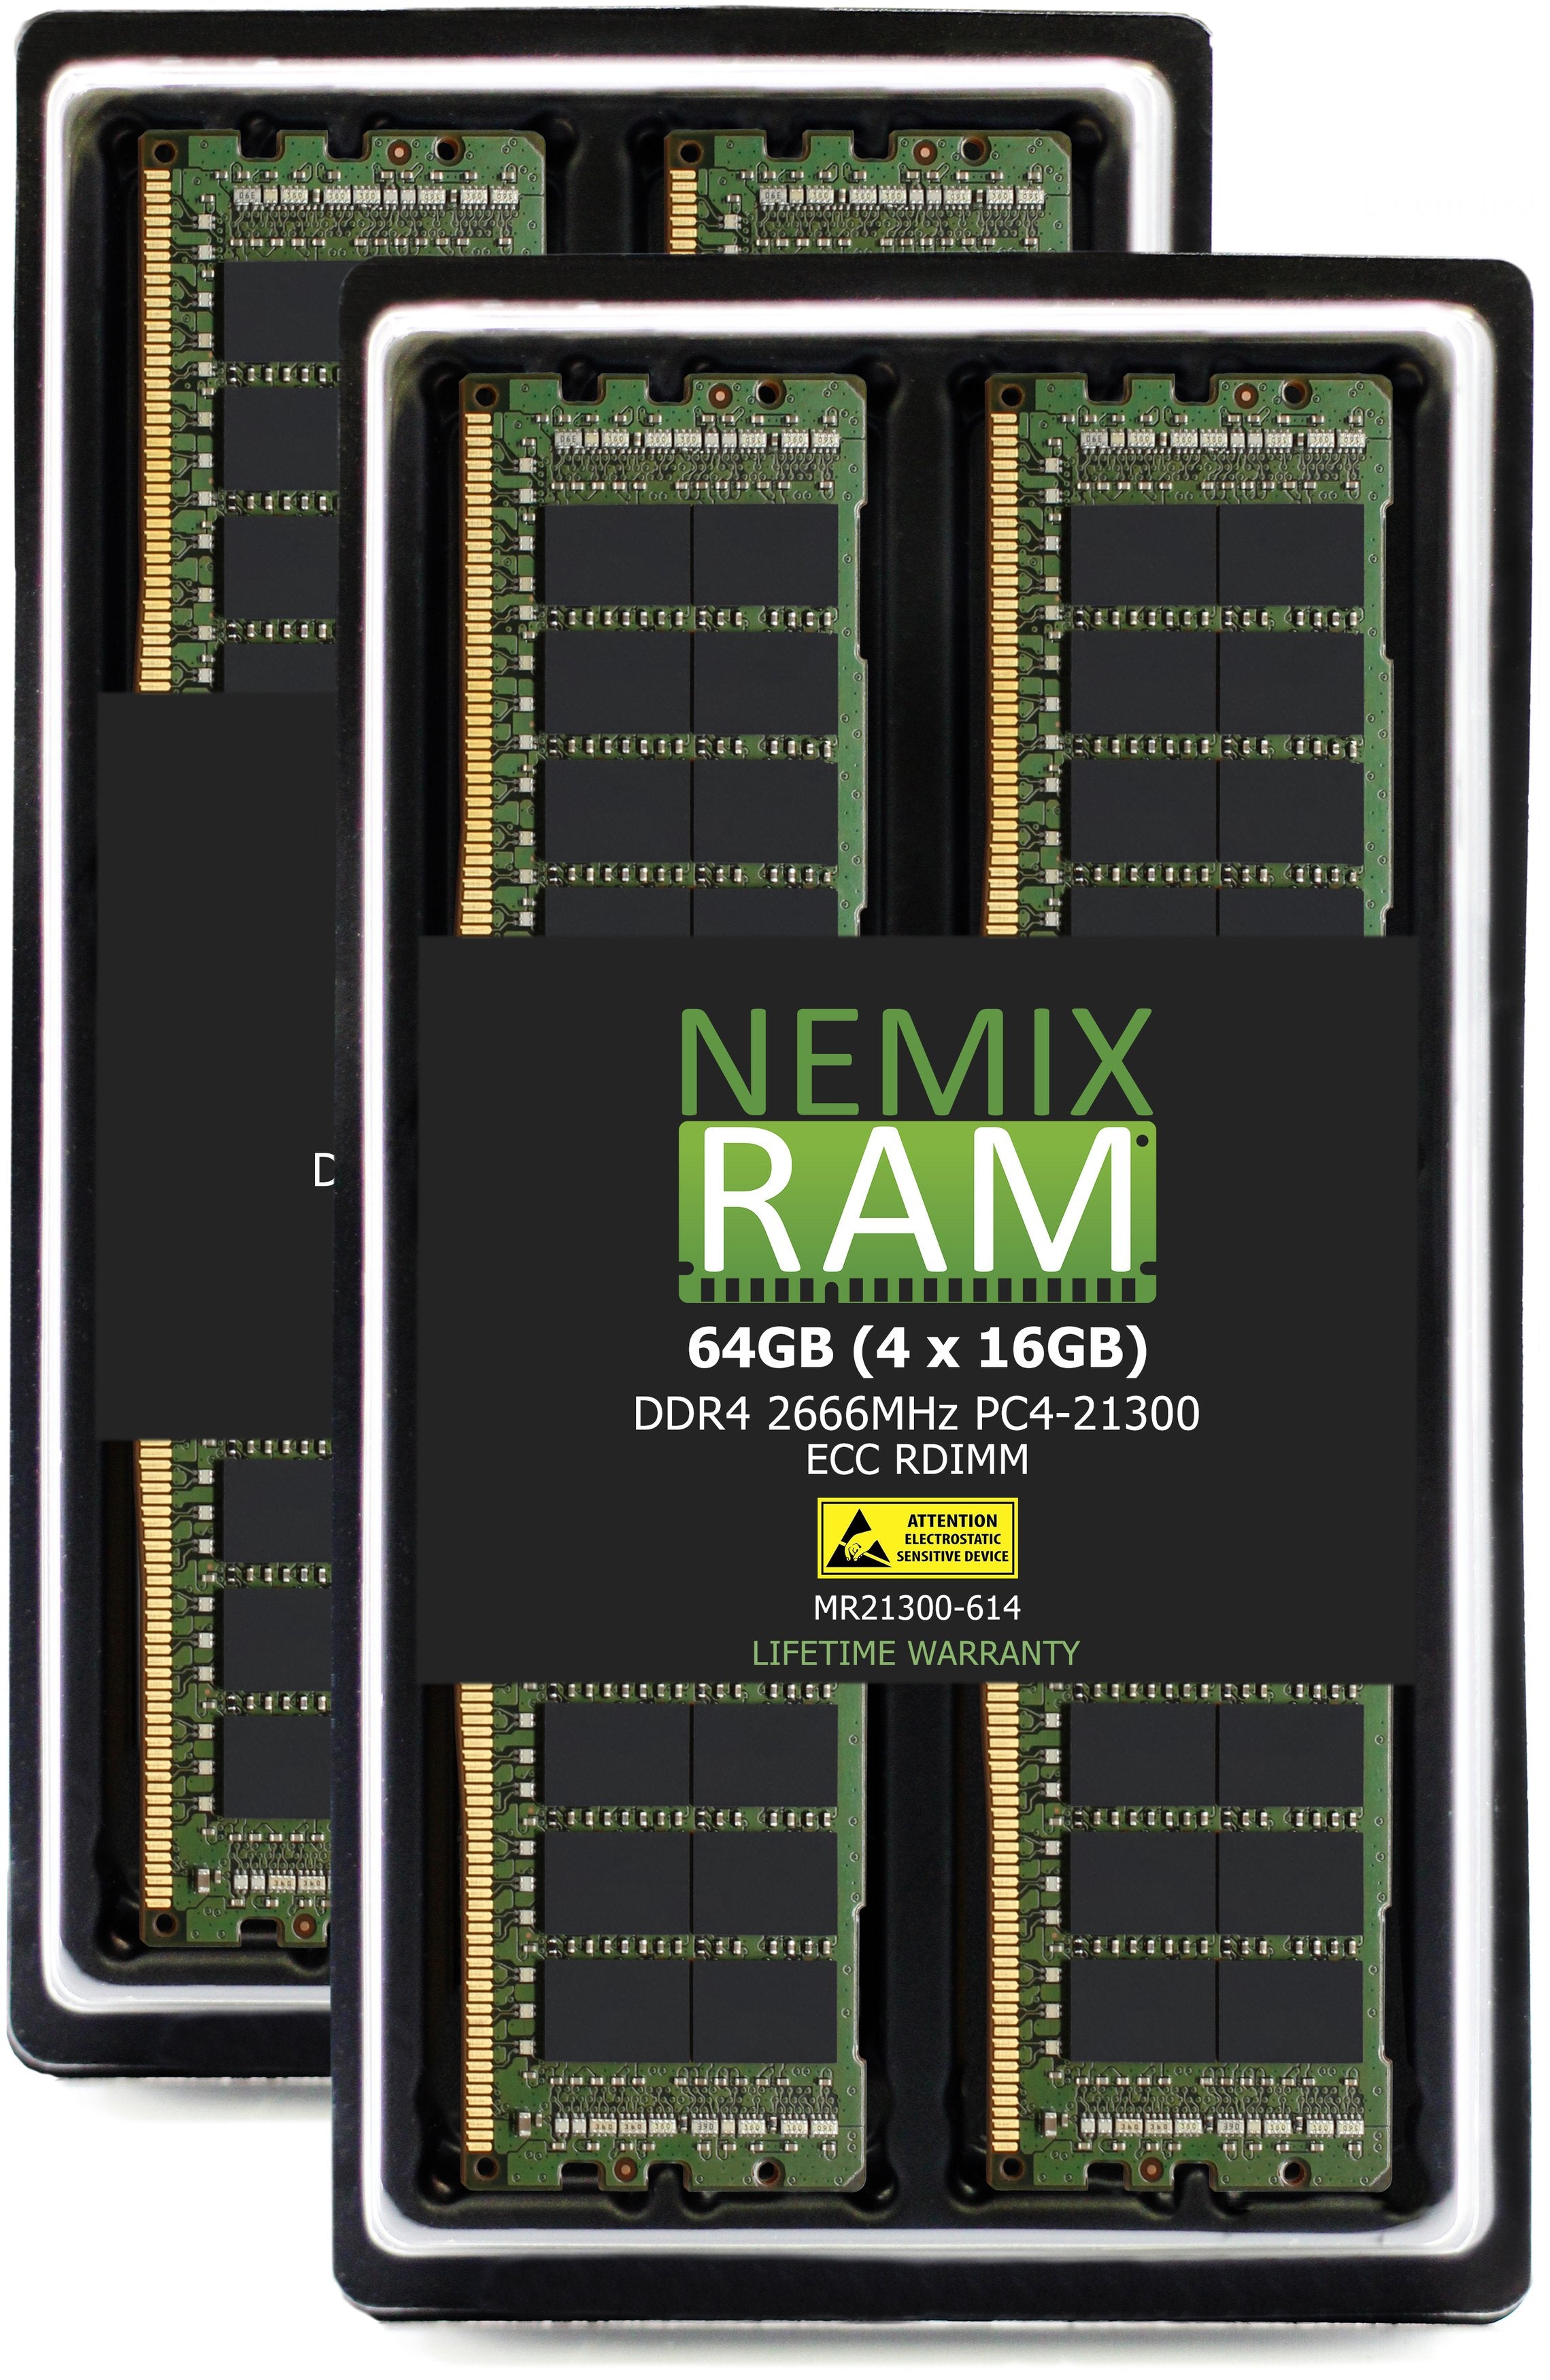 DDR4 2666MHZ PC4-21300 RDIMM Compatible with Synology SA3400